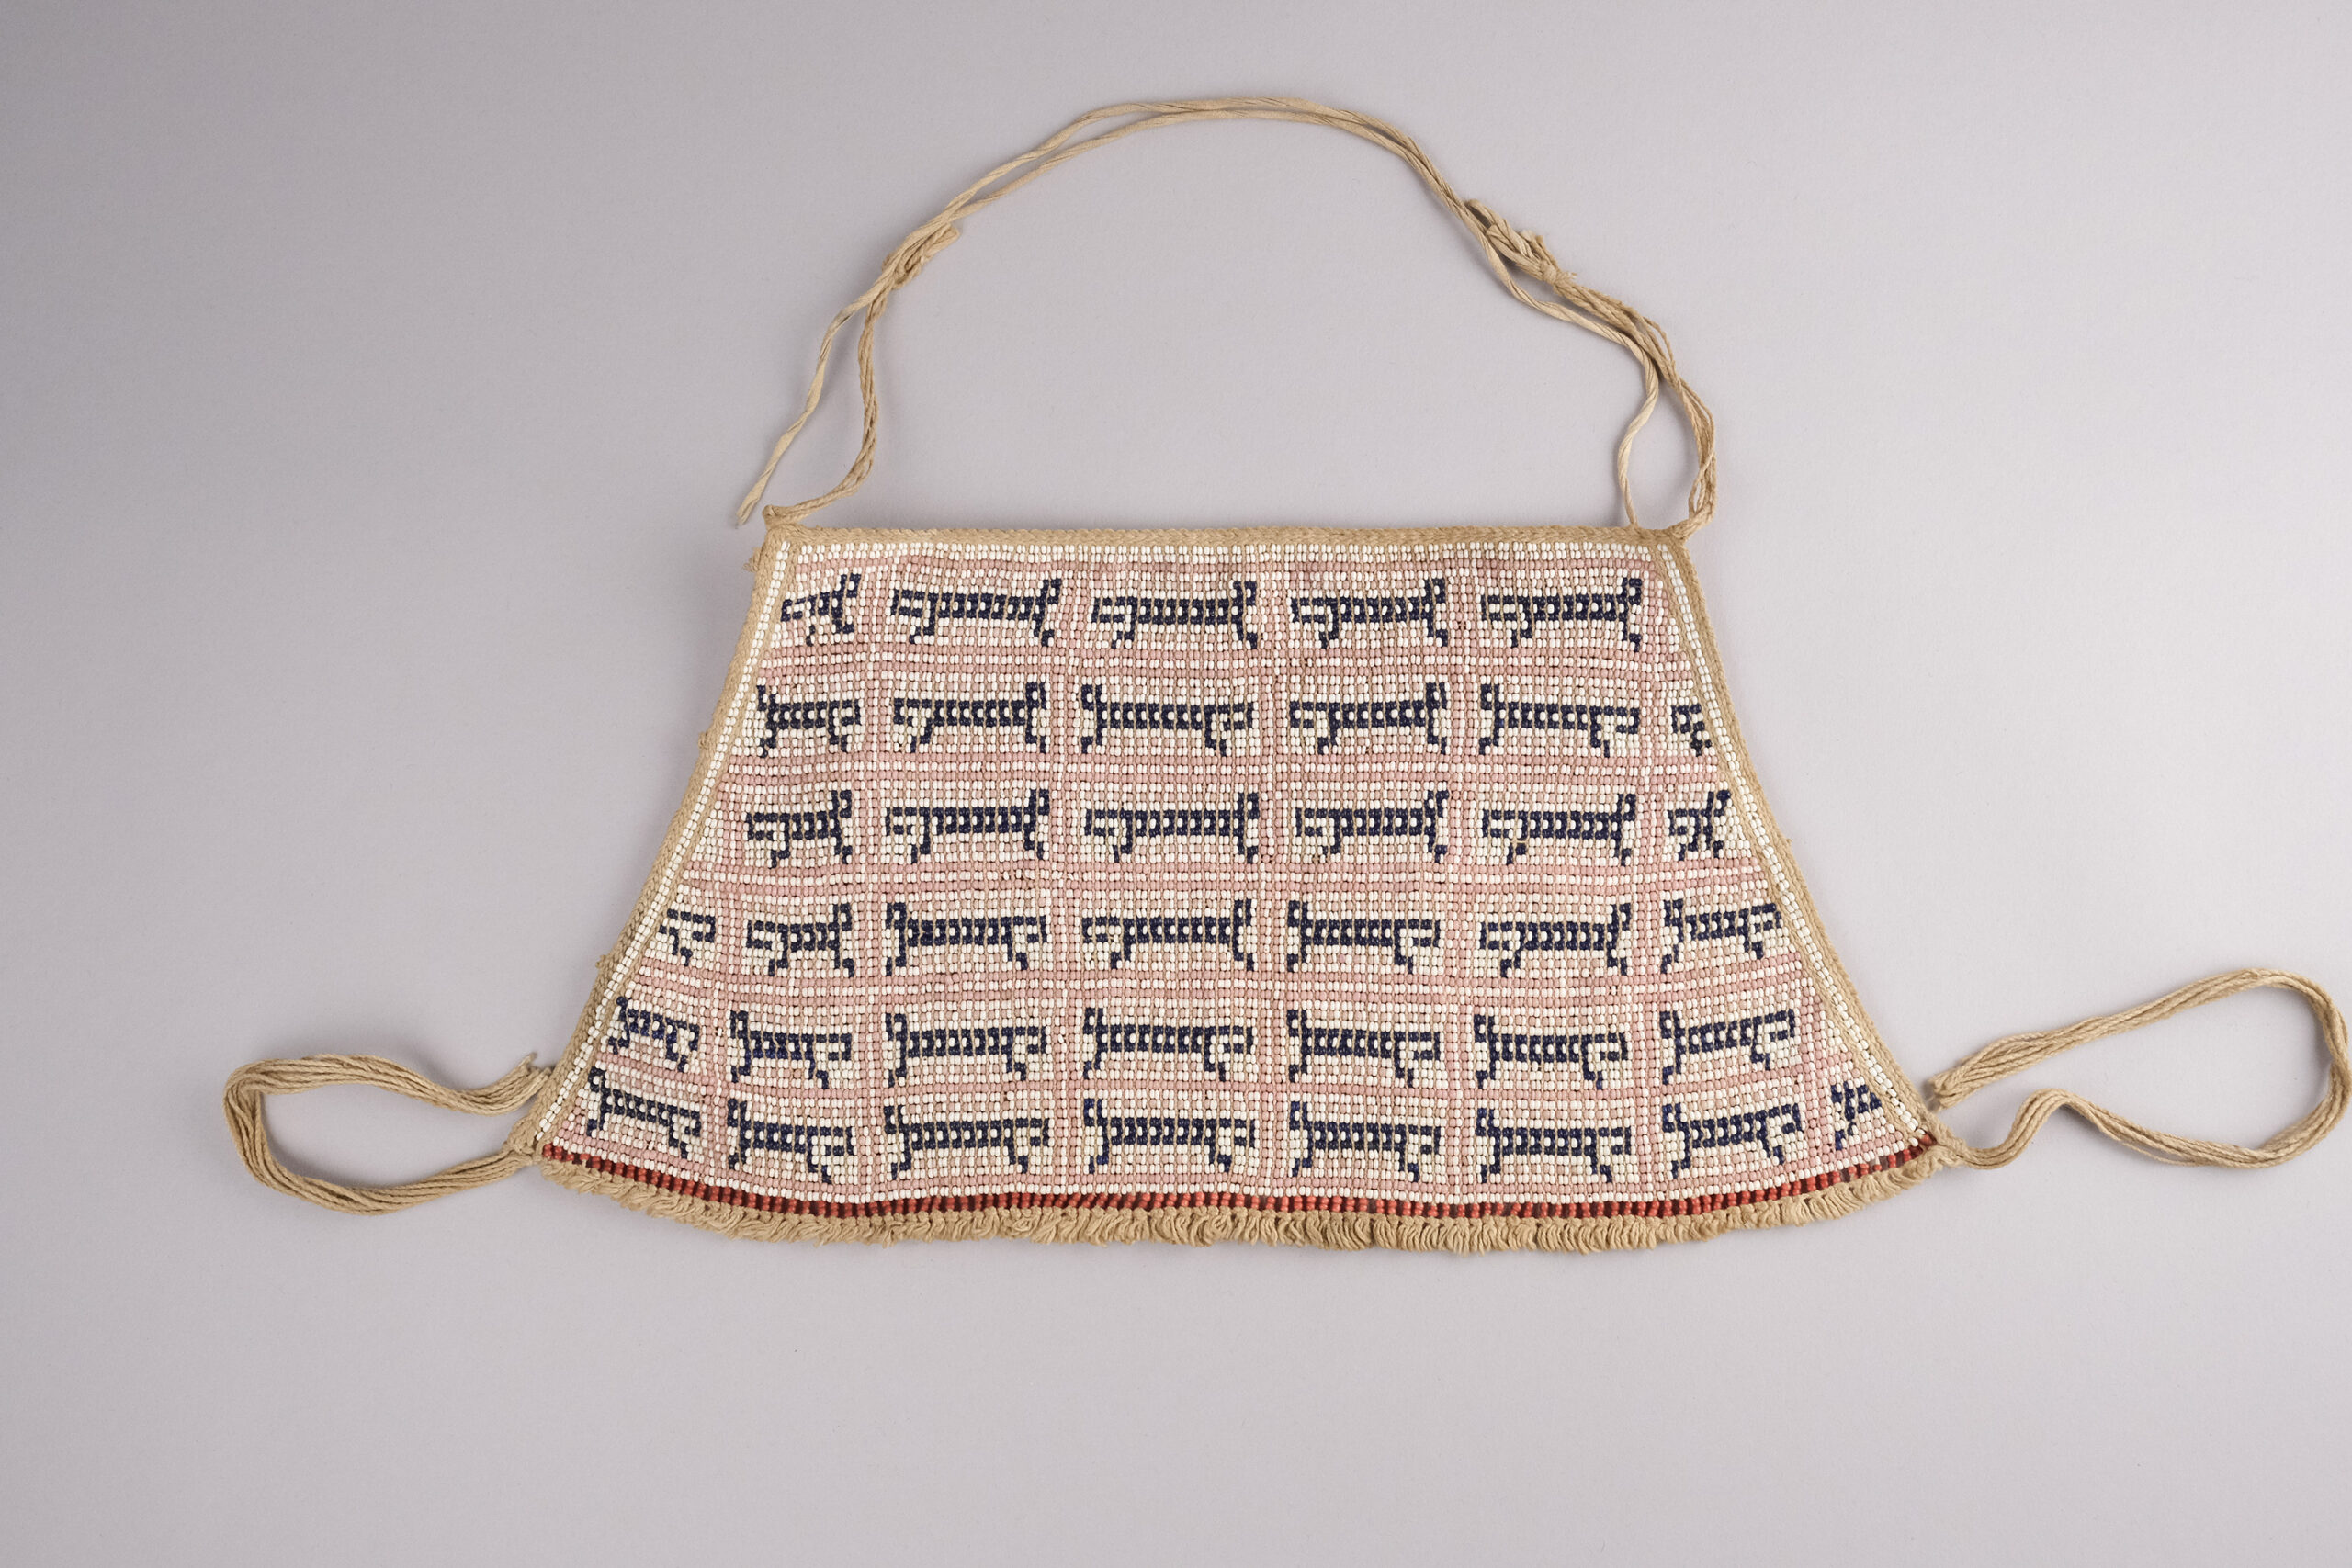 Apron with monkey figures, Am1936,0714.24